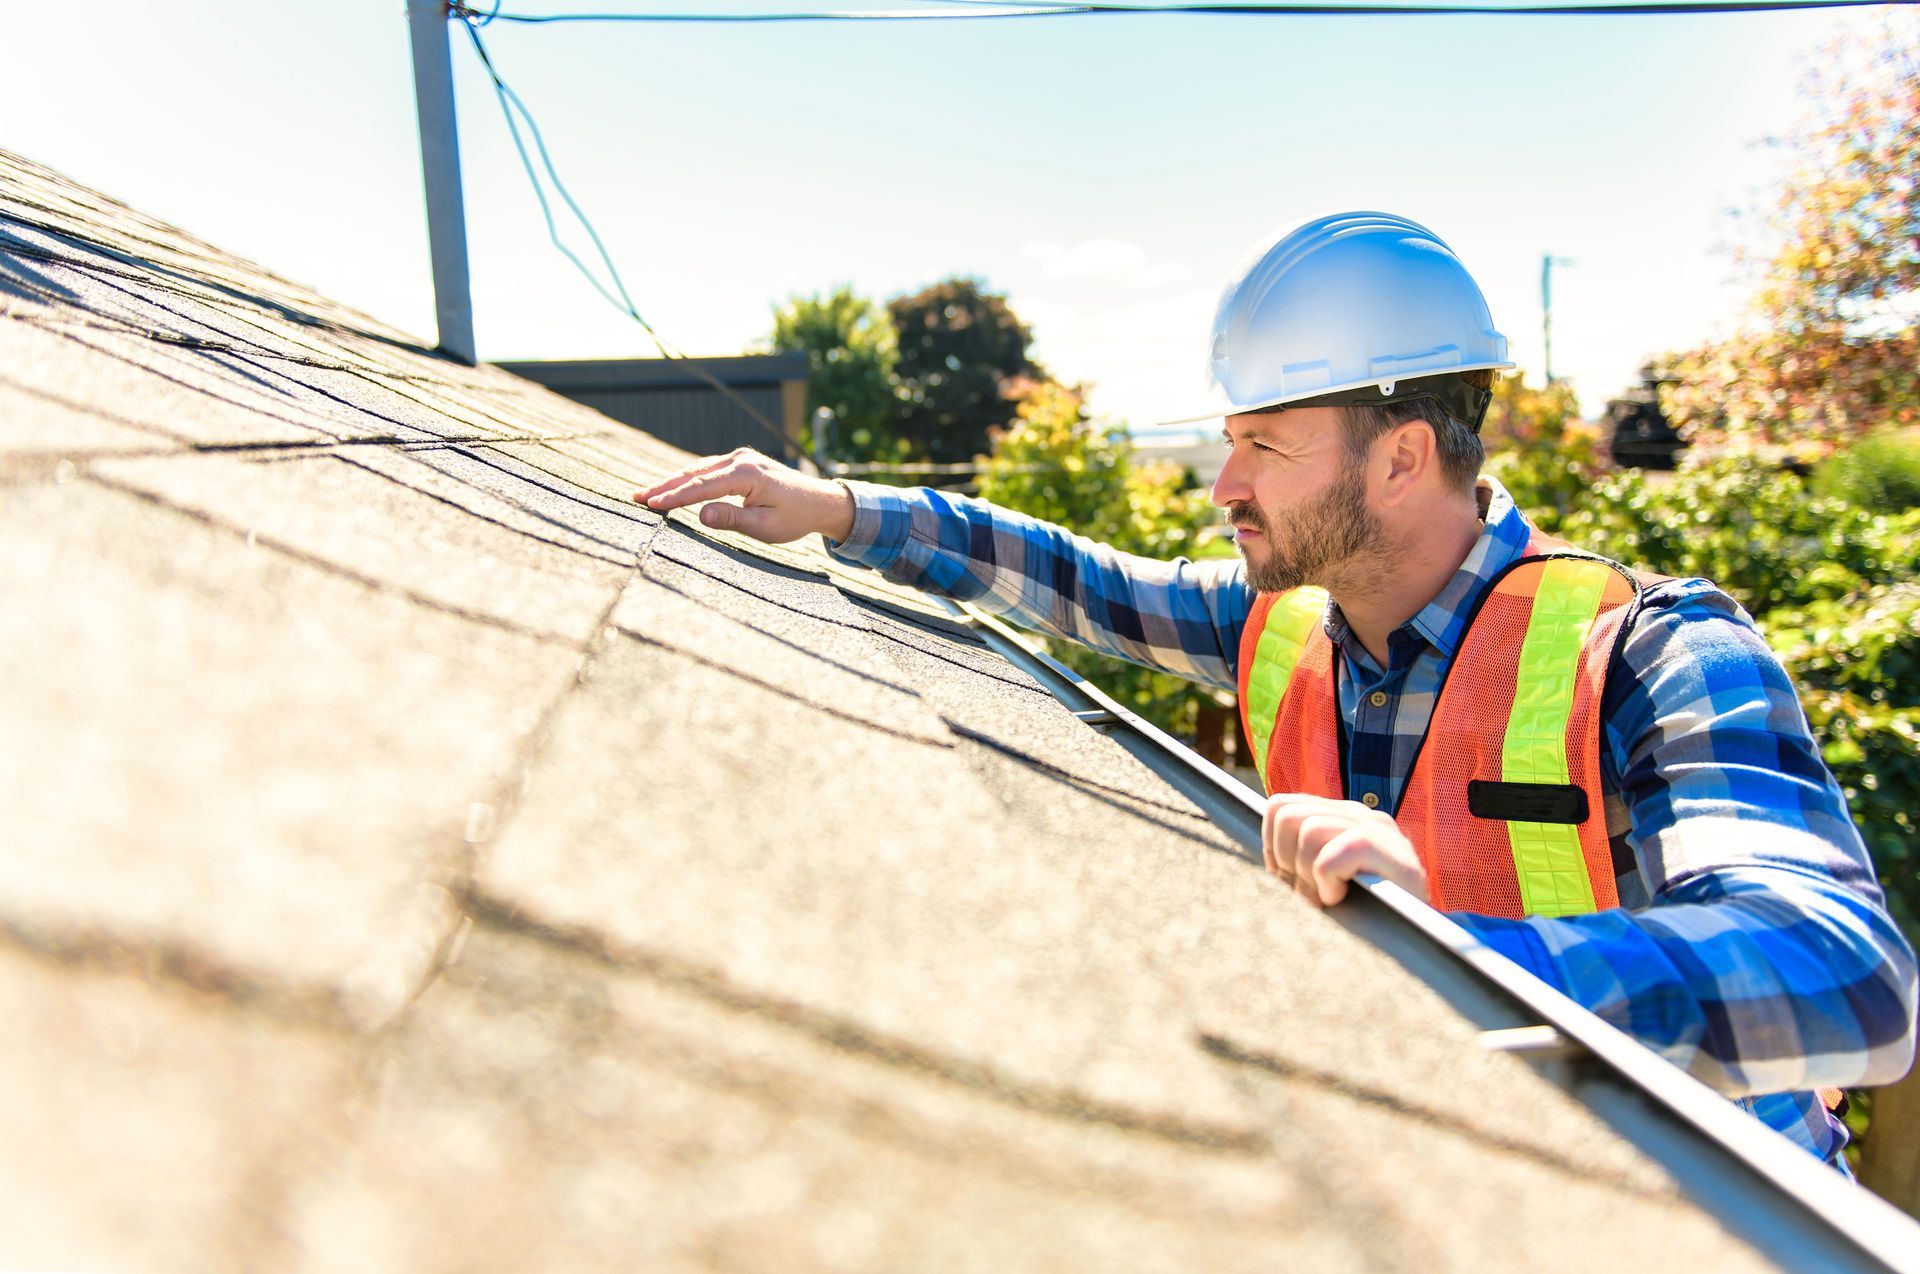 Baton Rouge Roofing Companies: Top Questions To Ask Before Hiring A Roofing Contractor